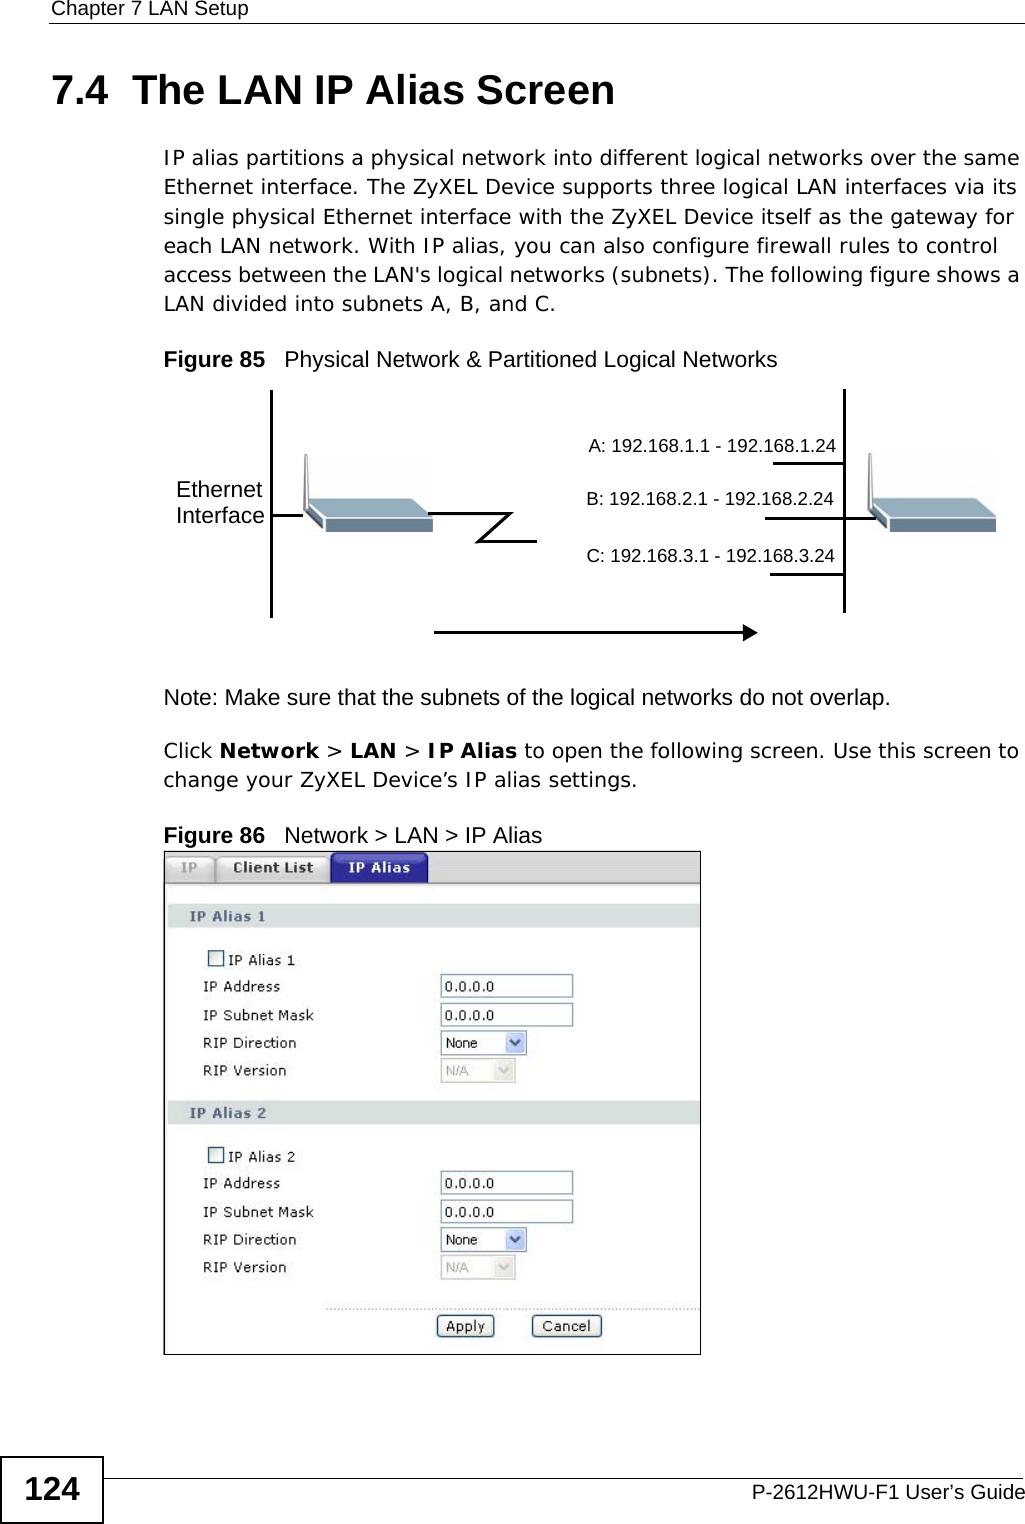 Chapter 7 LAN SetupP-2612HWU-F1 User’s Guide1247.4  The LAN IP Alias ScreenIP alias partitions a physical network into different logical networks over the same Ethernet interface. The ZyXEL Device supports three logical LAN interfaces via its single physical Ethernet interface with the ZyXEL Device itself as the gateway for each LAN network. With IP alias, you can also configure firewall rules to control access between the LAN&apos;s logical networks (subnets). The following figure shows a LAN divided into subnets A, B, and C.Figure 85   Physical Network &amp; Partitioned Logical NetworksNote: Make sure that the subnets of the logical networks do not overlap.Click Network &gt; LAN &gt; IP Alias to open the following screen. Use this screen to change your ZyXEL Device’s IP alias settings.Figure 86   Network &gt; LAN &gt; IP AliasEthernetInterfaceA: 192.168.1.1 - 192.168.1.24B: 192.168.2.1 - 192.168.2.24C: 192.168.3.1 - 192.168.3.24